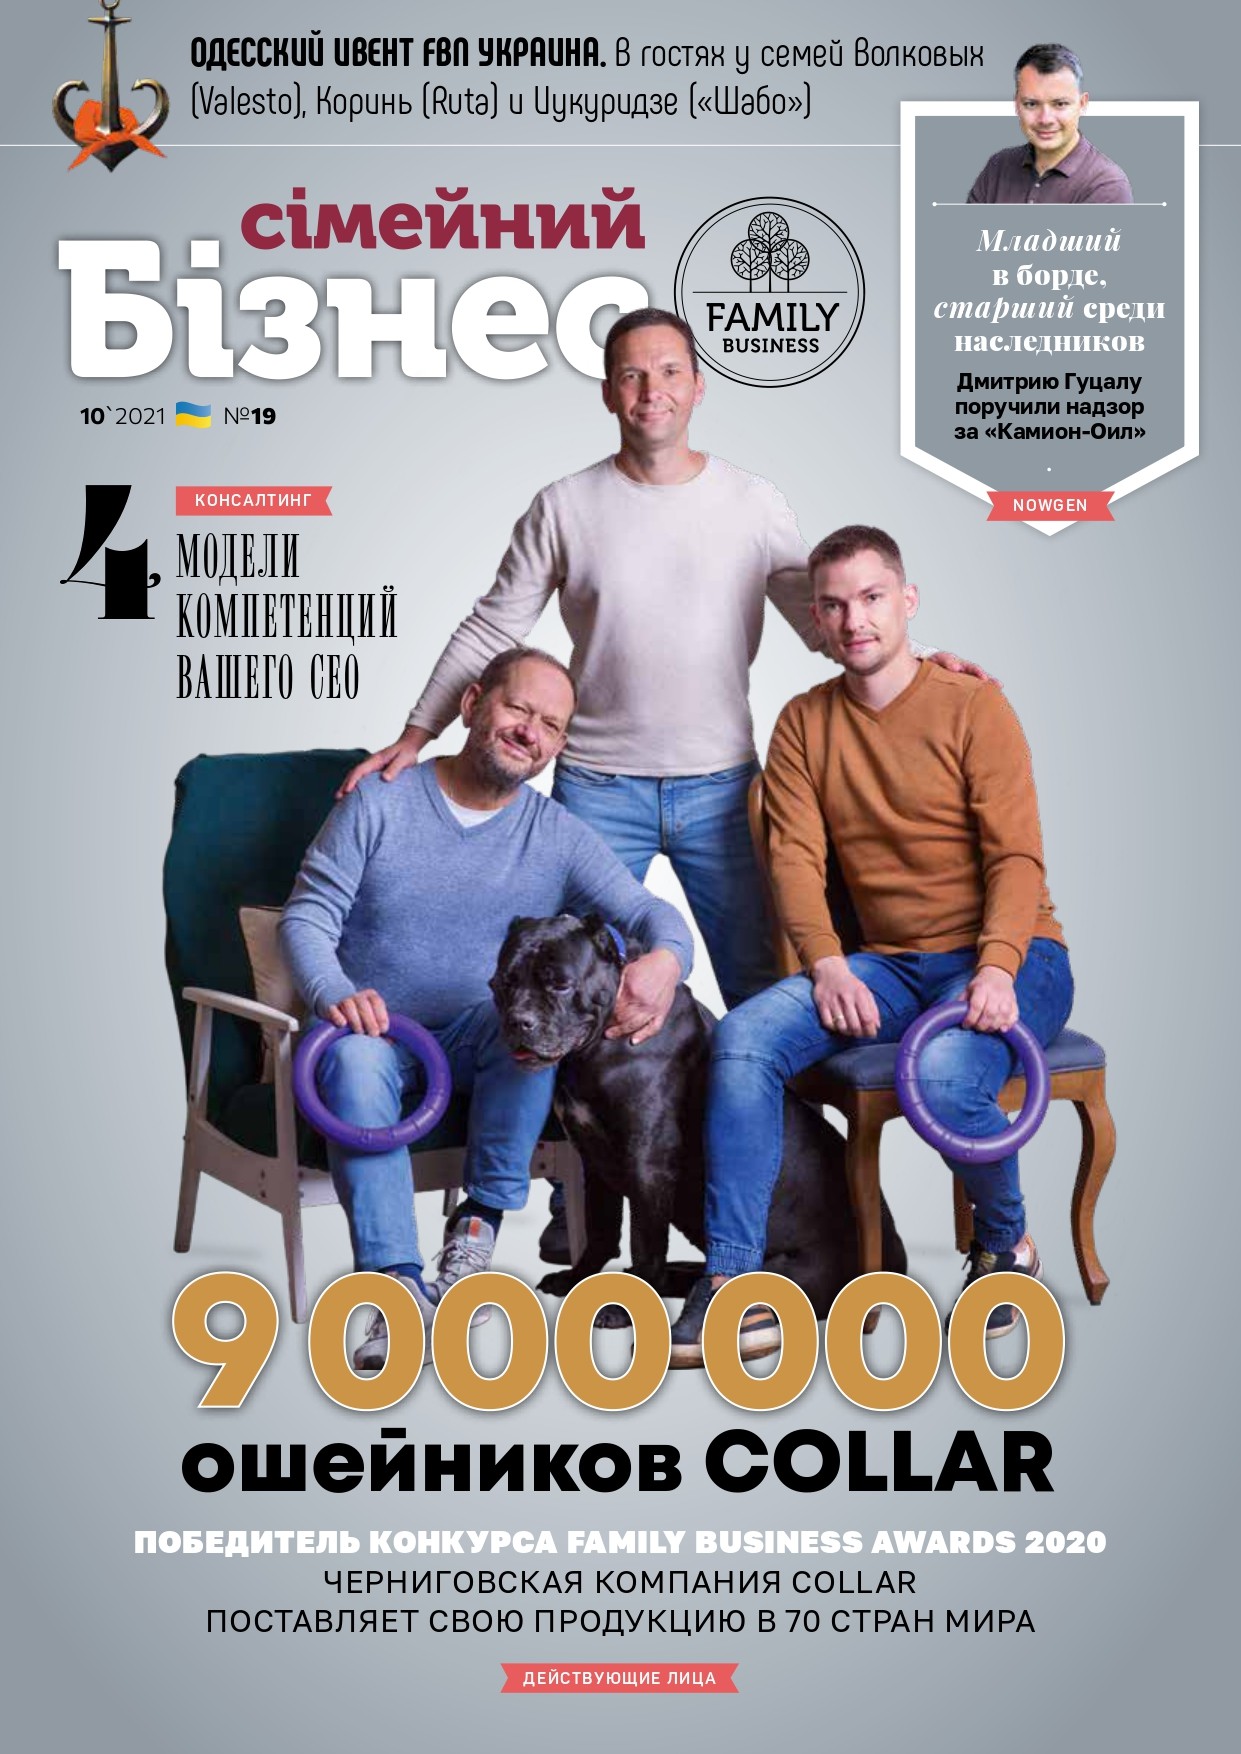 The 19th issue of the ‘Family Business’ magazine has been published